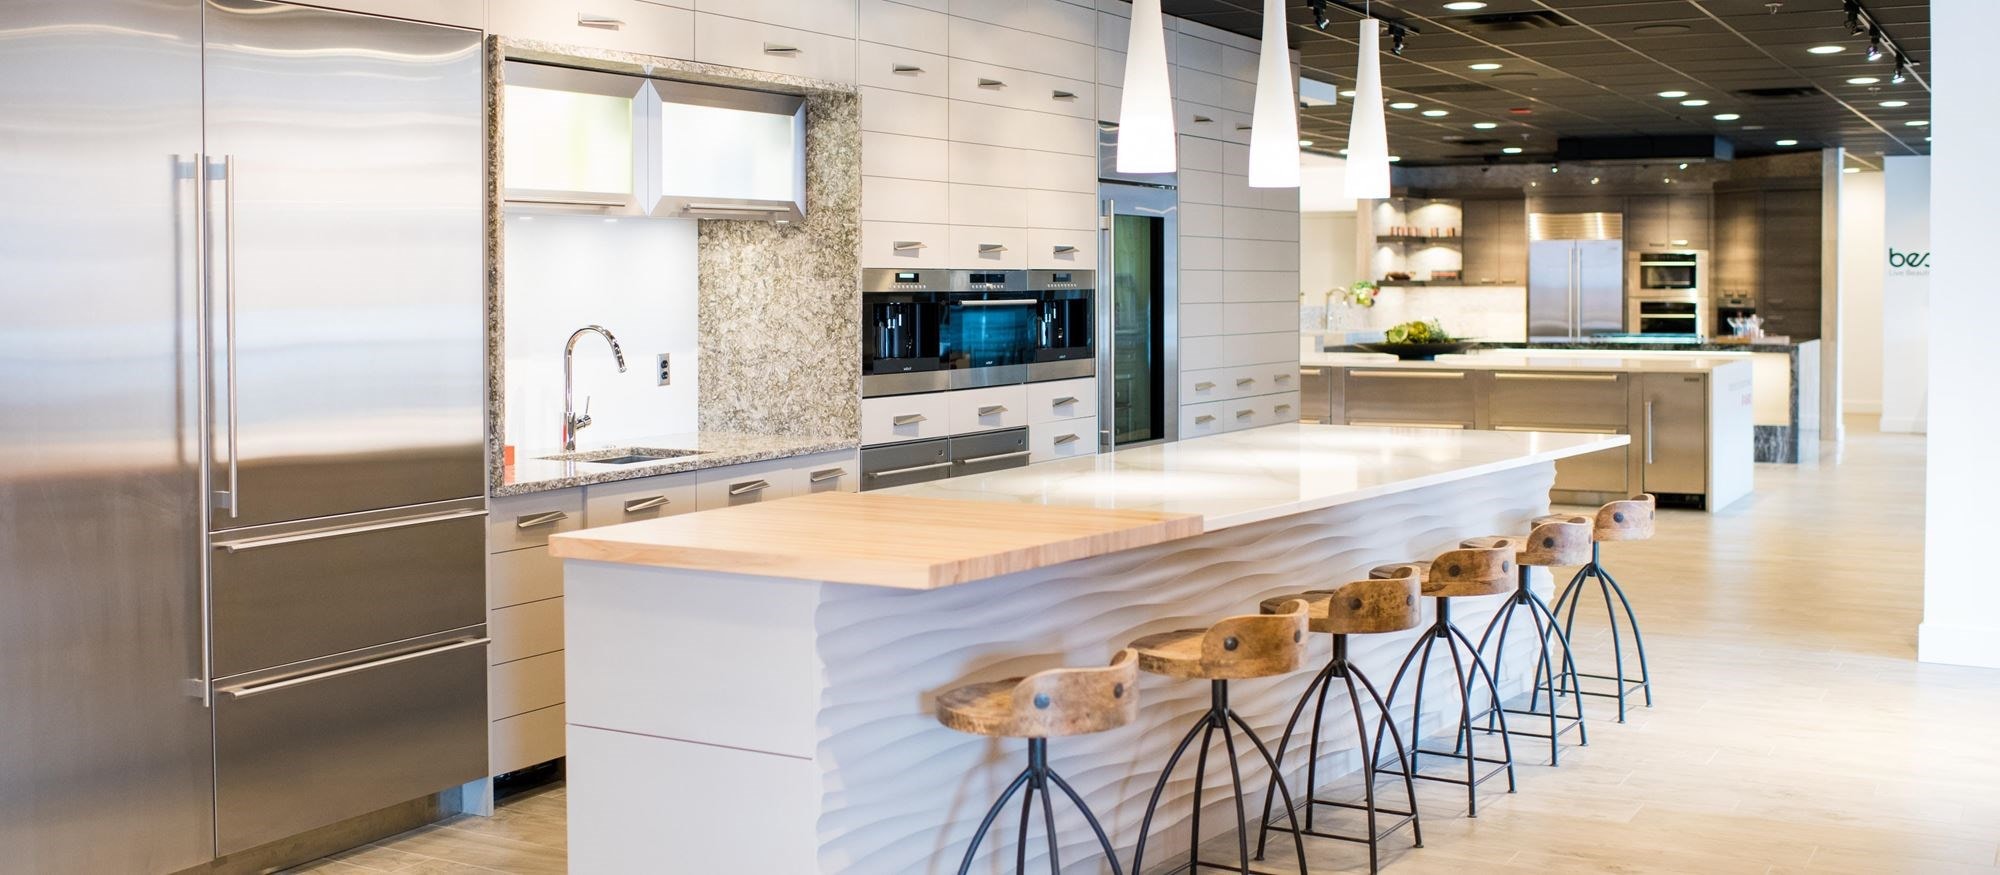 Choose the best combination of appliances with a personal consultation at Sub-Zero, Wolf and Cove Showroom in Salt Lake City, Utah